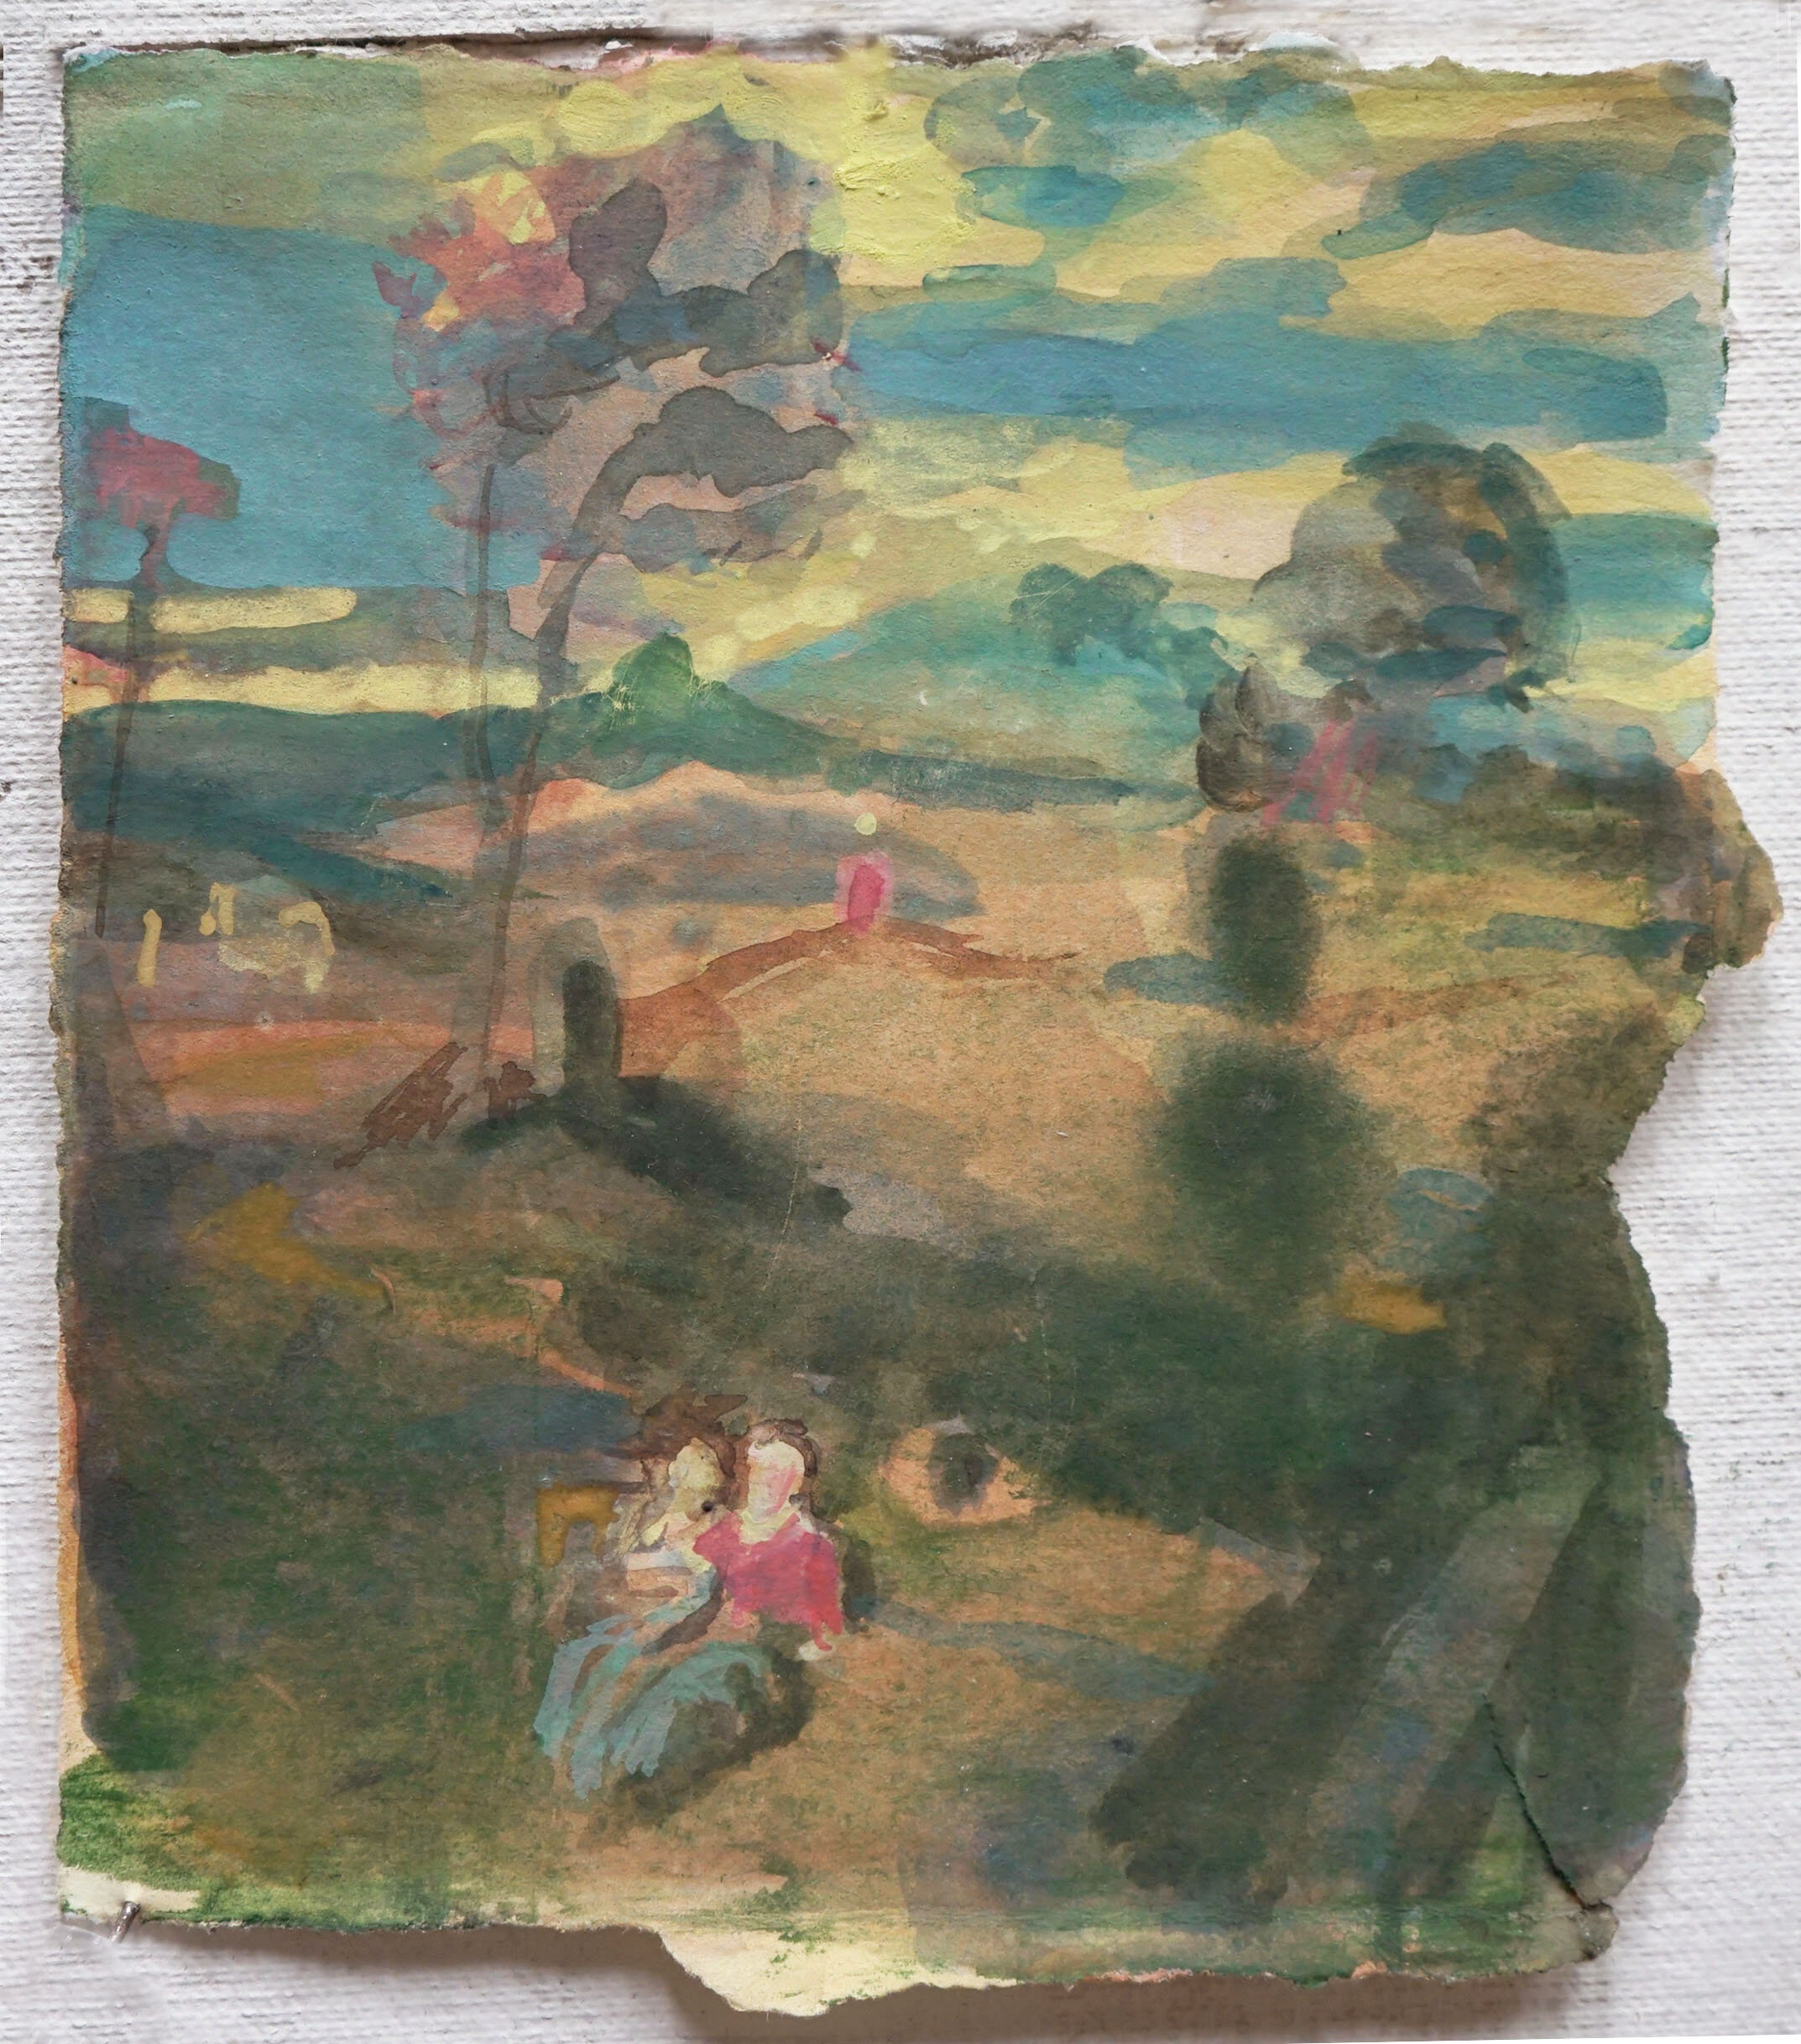 Rest on the Flight to Egypt (After Caracci), 6.25" x 5", 2020 (sold)